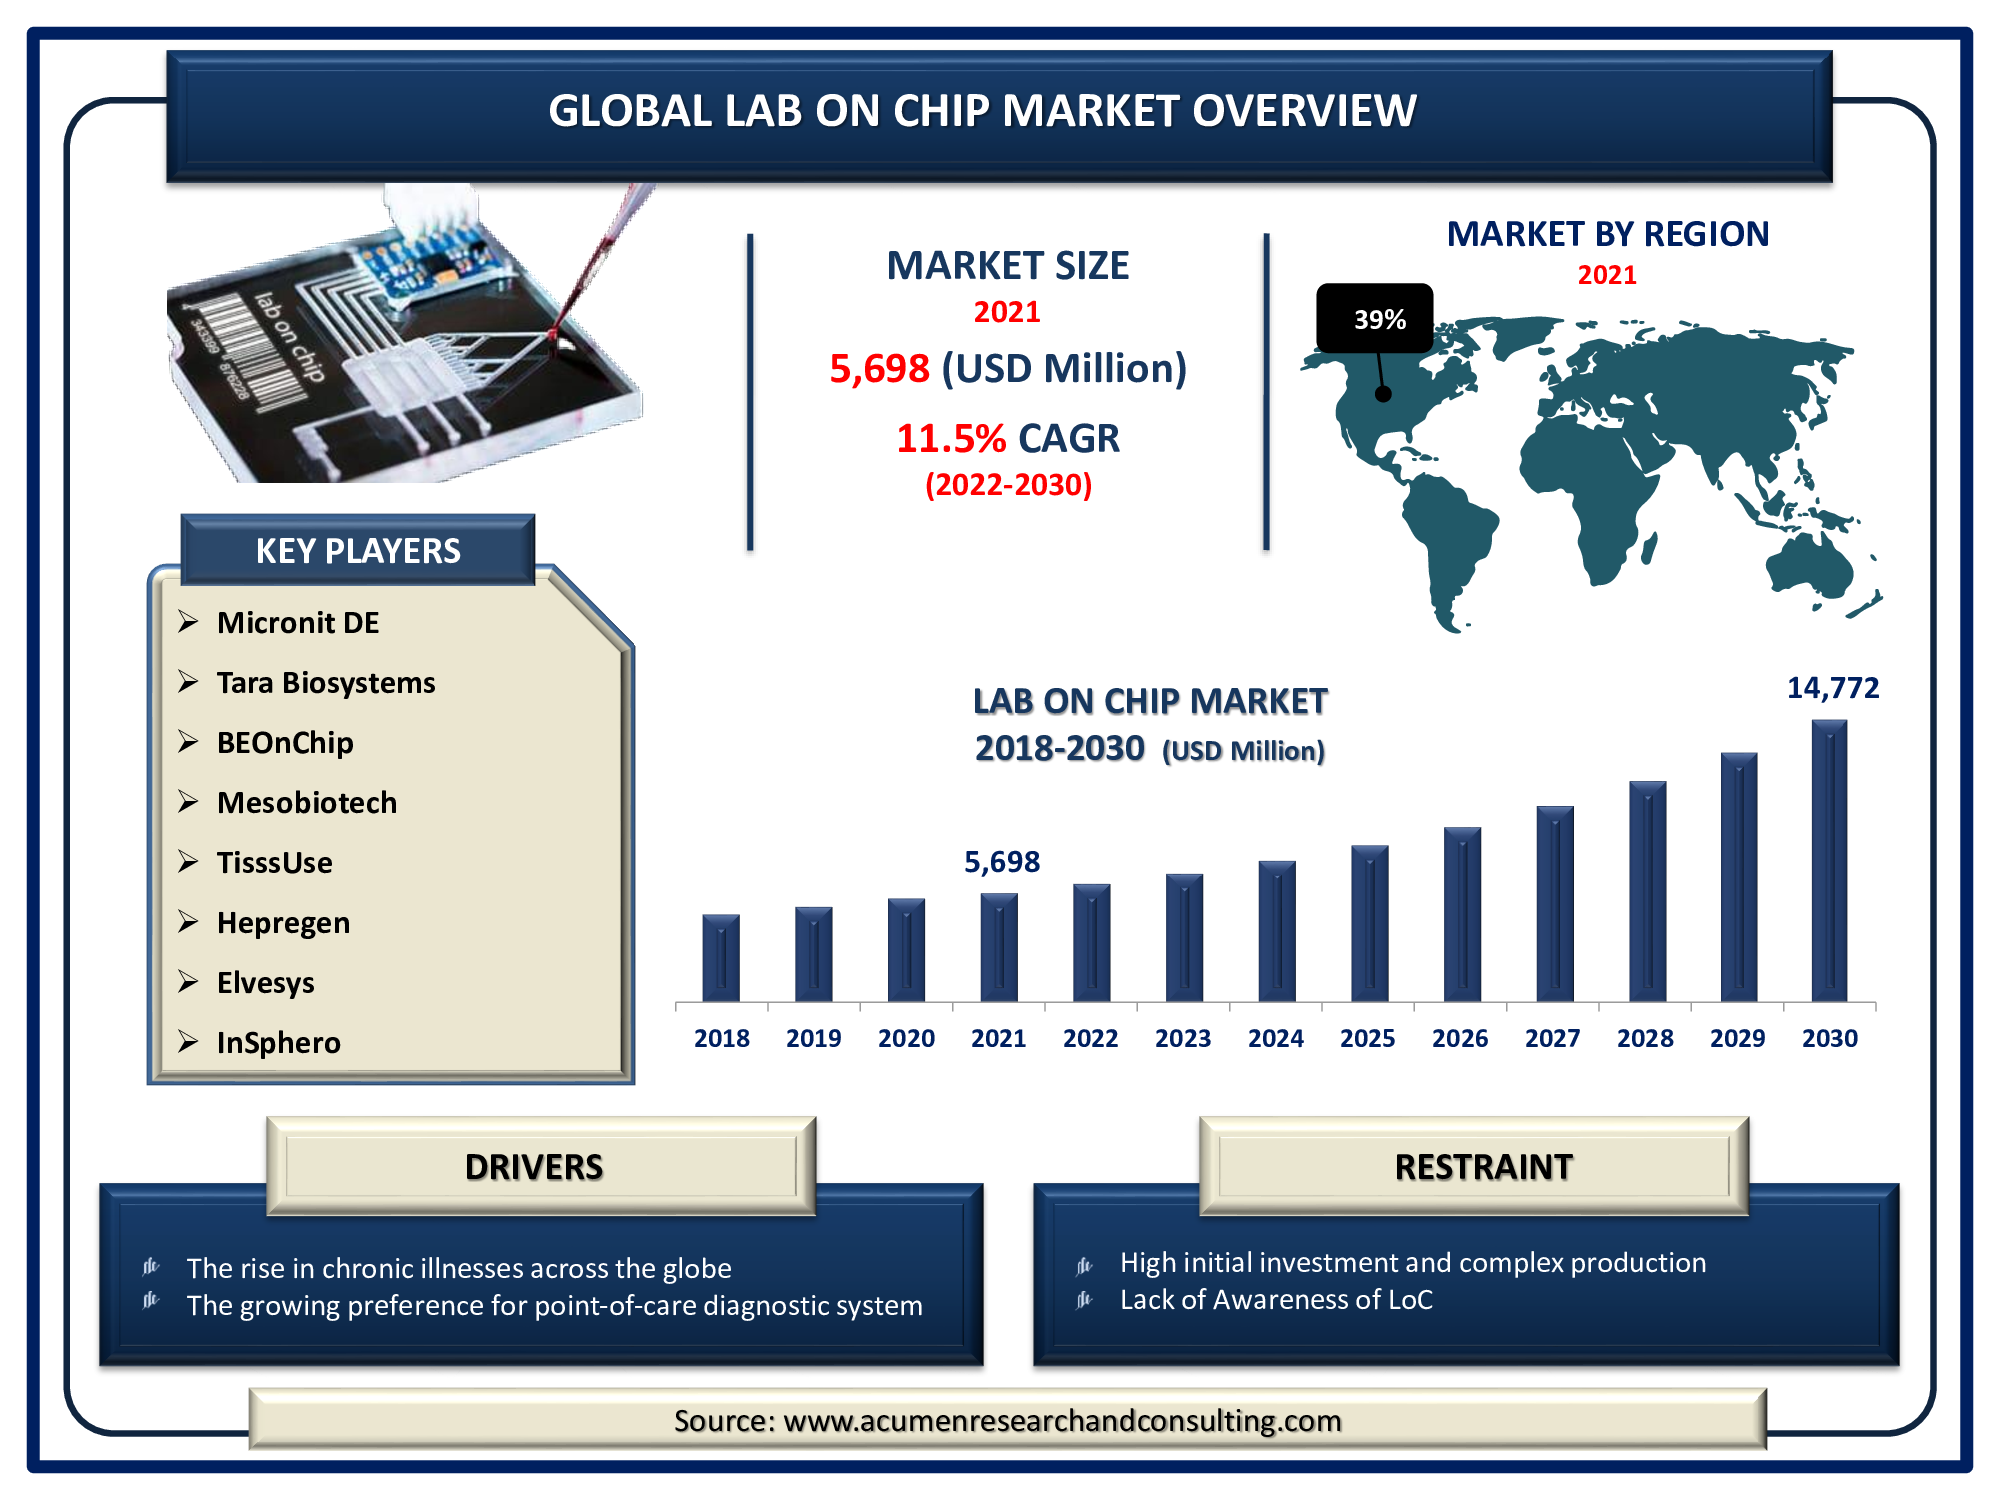 Lab on Chip Market is expected to reach the value of USD 14,772 Million by 2030 growing at a CAGR of 11.5%